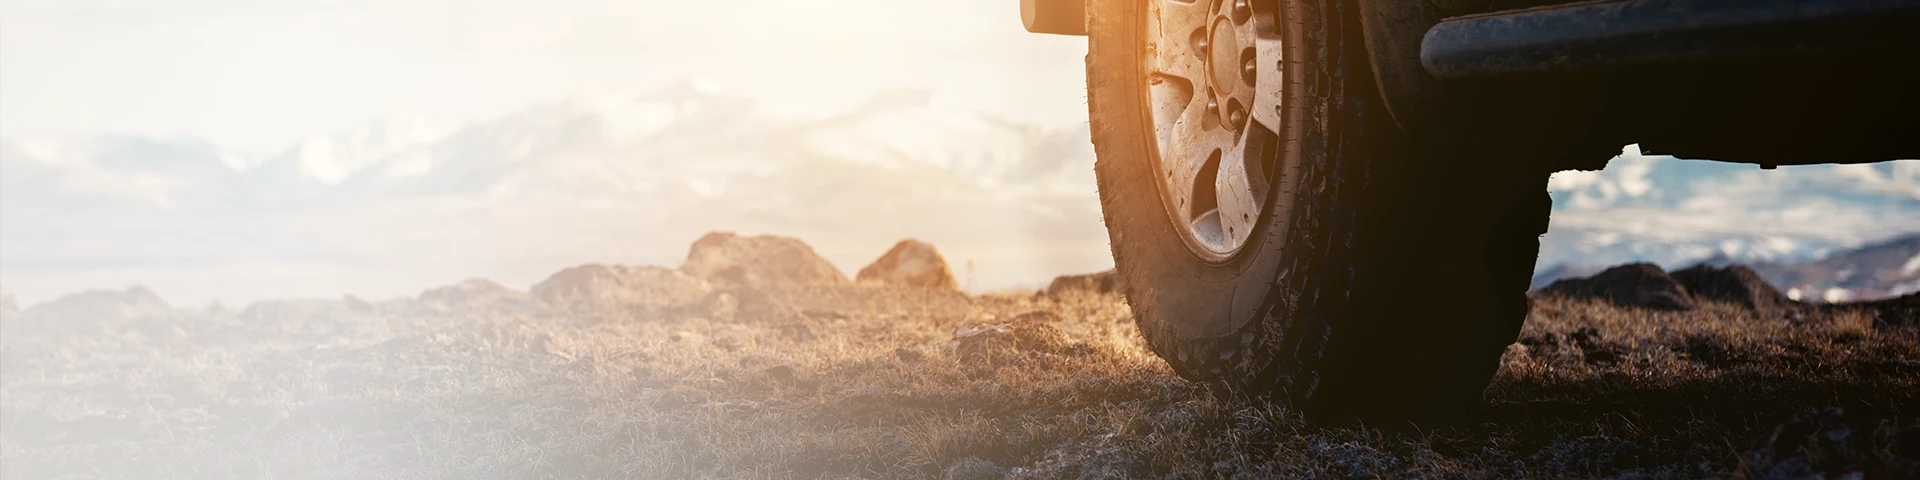 Shopping for the best auto loan rates Colorado? Consider a Bellco Credit Union auto loan and enjoy competitive Colorado auto loan rates, lease buyout options, and quick application process.